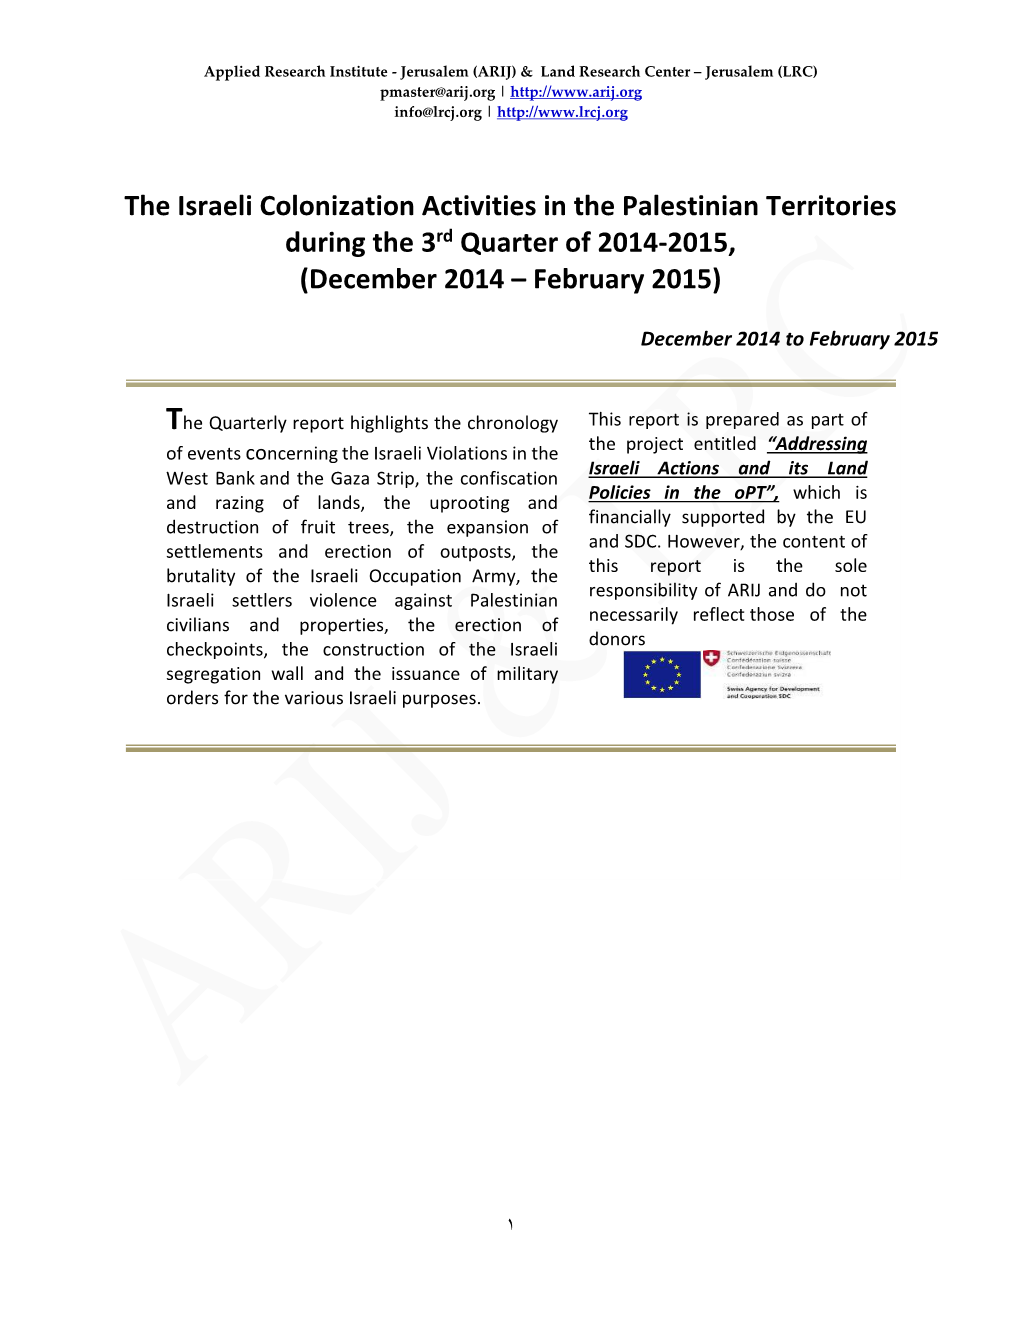 The Israeli Colonization Activities in the Palestinian Territories During the 3Rd Quarter of 2014-2015, (December 2014 – February 2015)